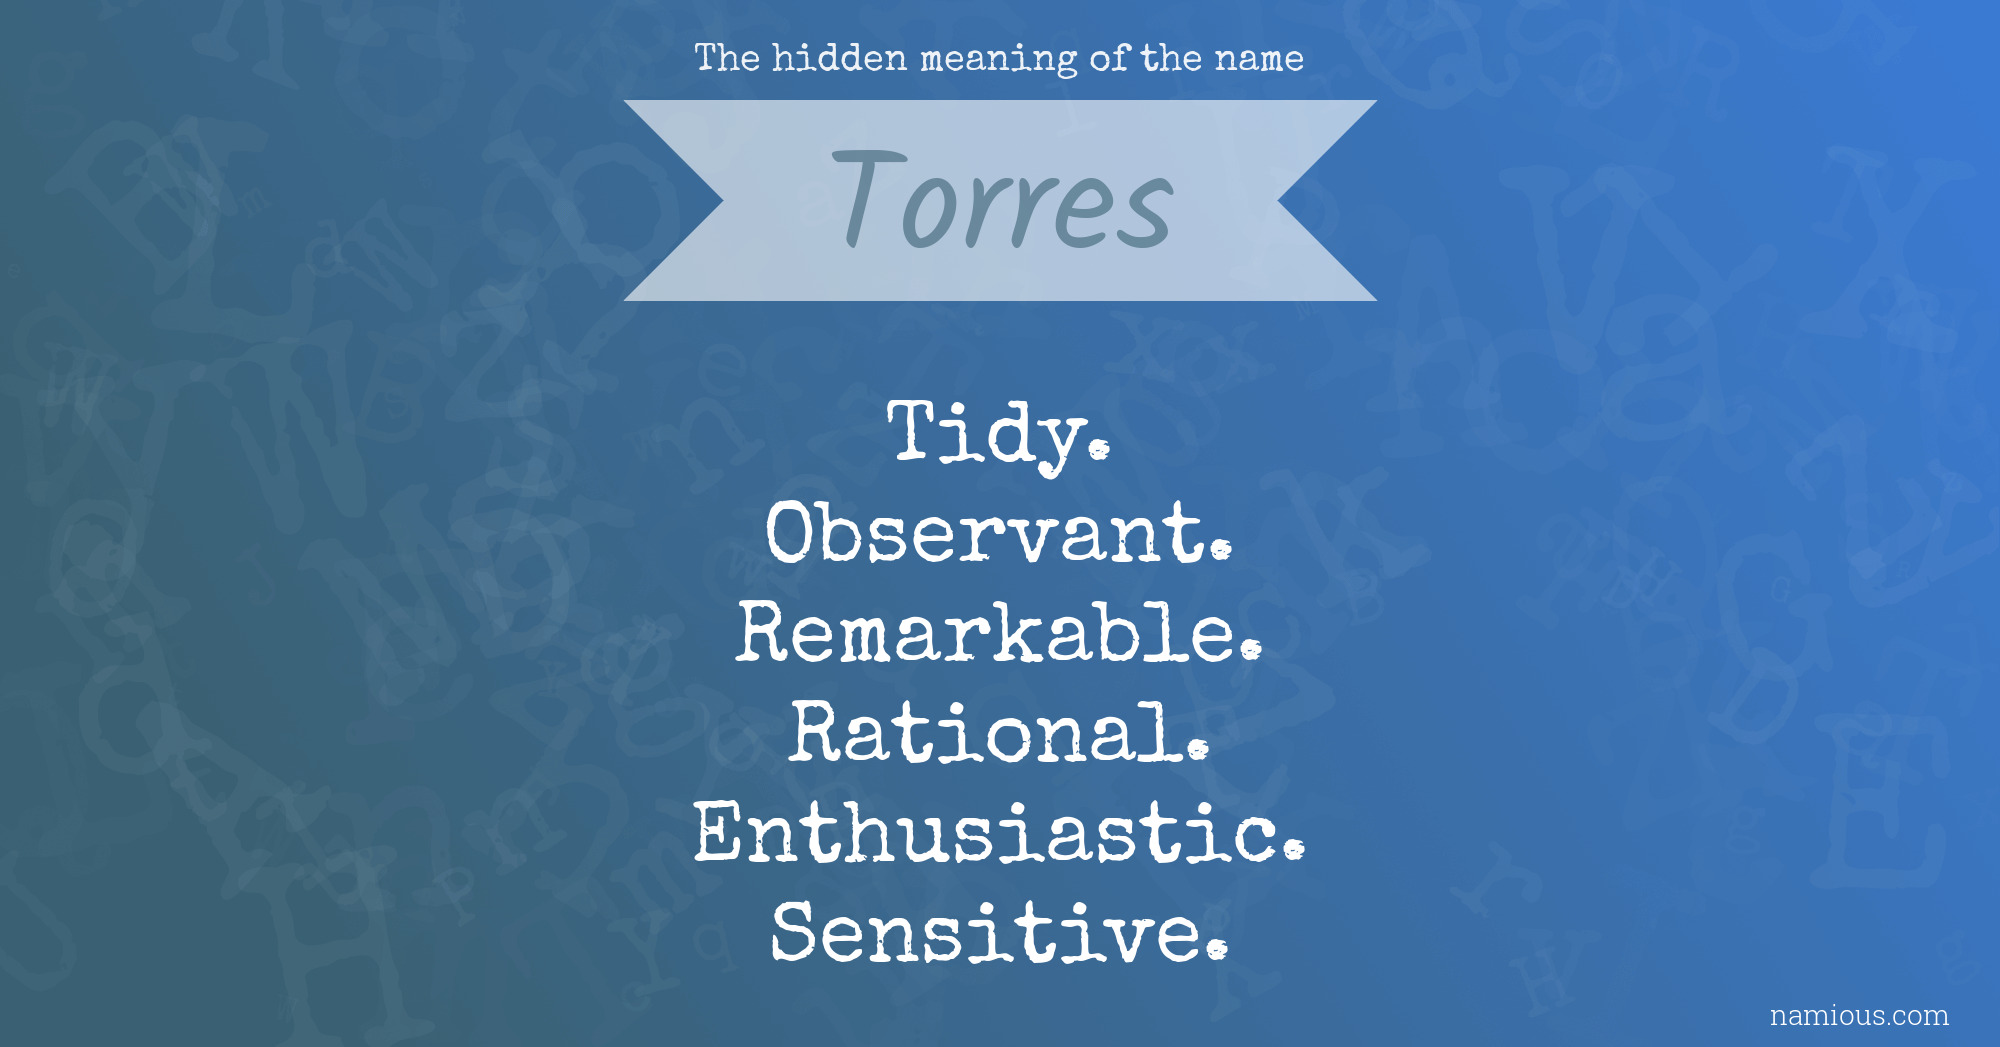 The hidden meaning of the name Torres